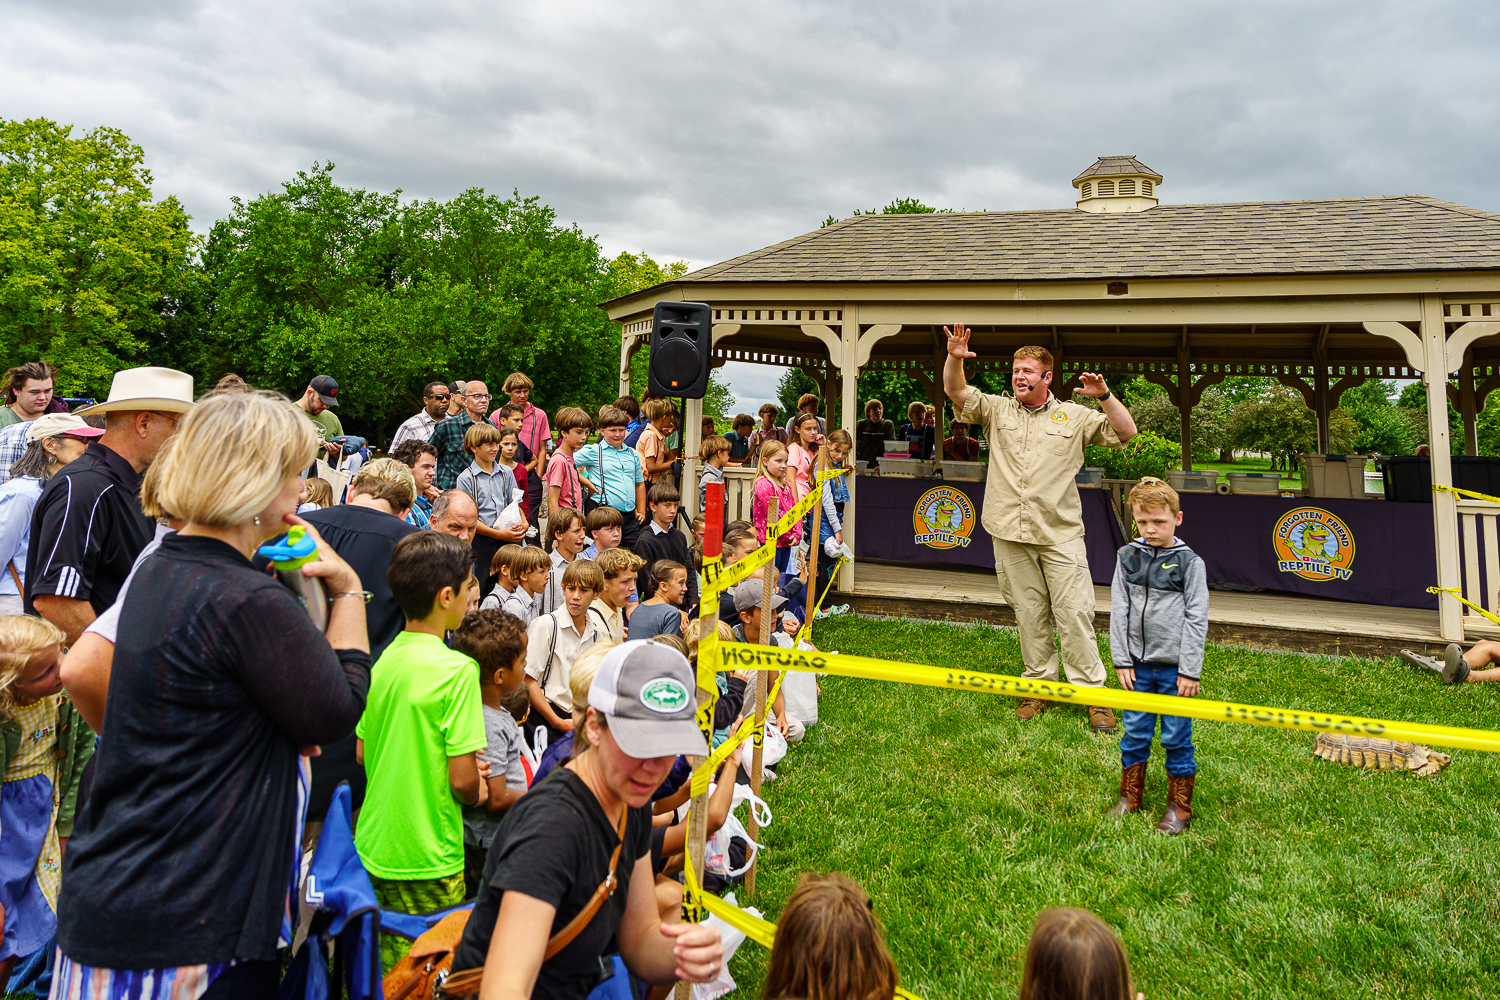 A Reptile Show in the Park